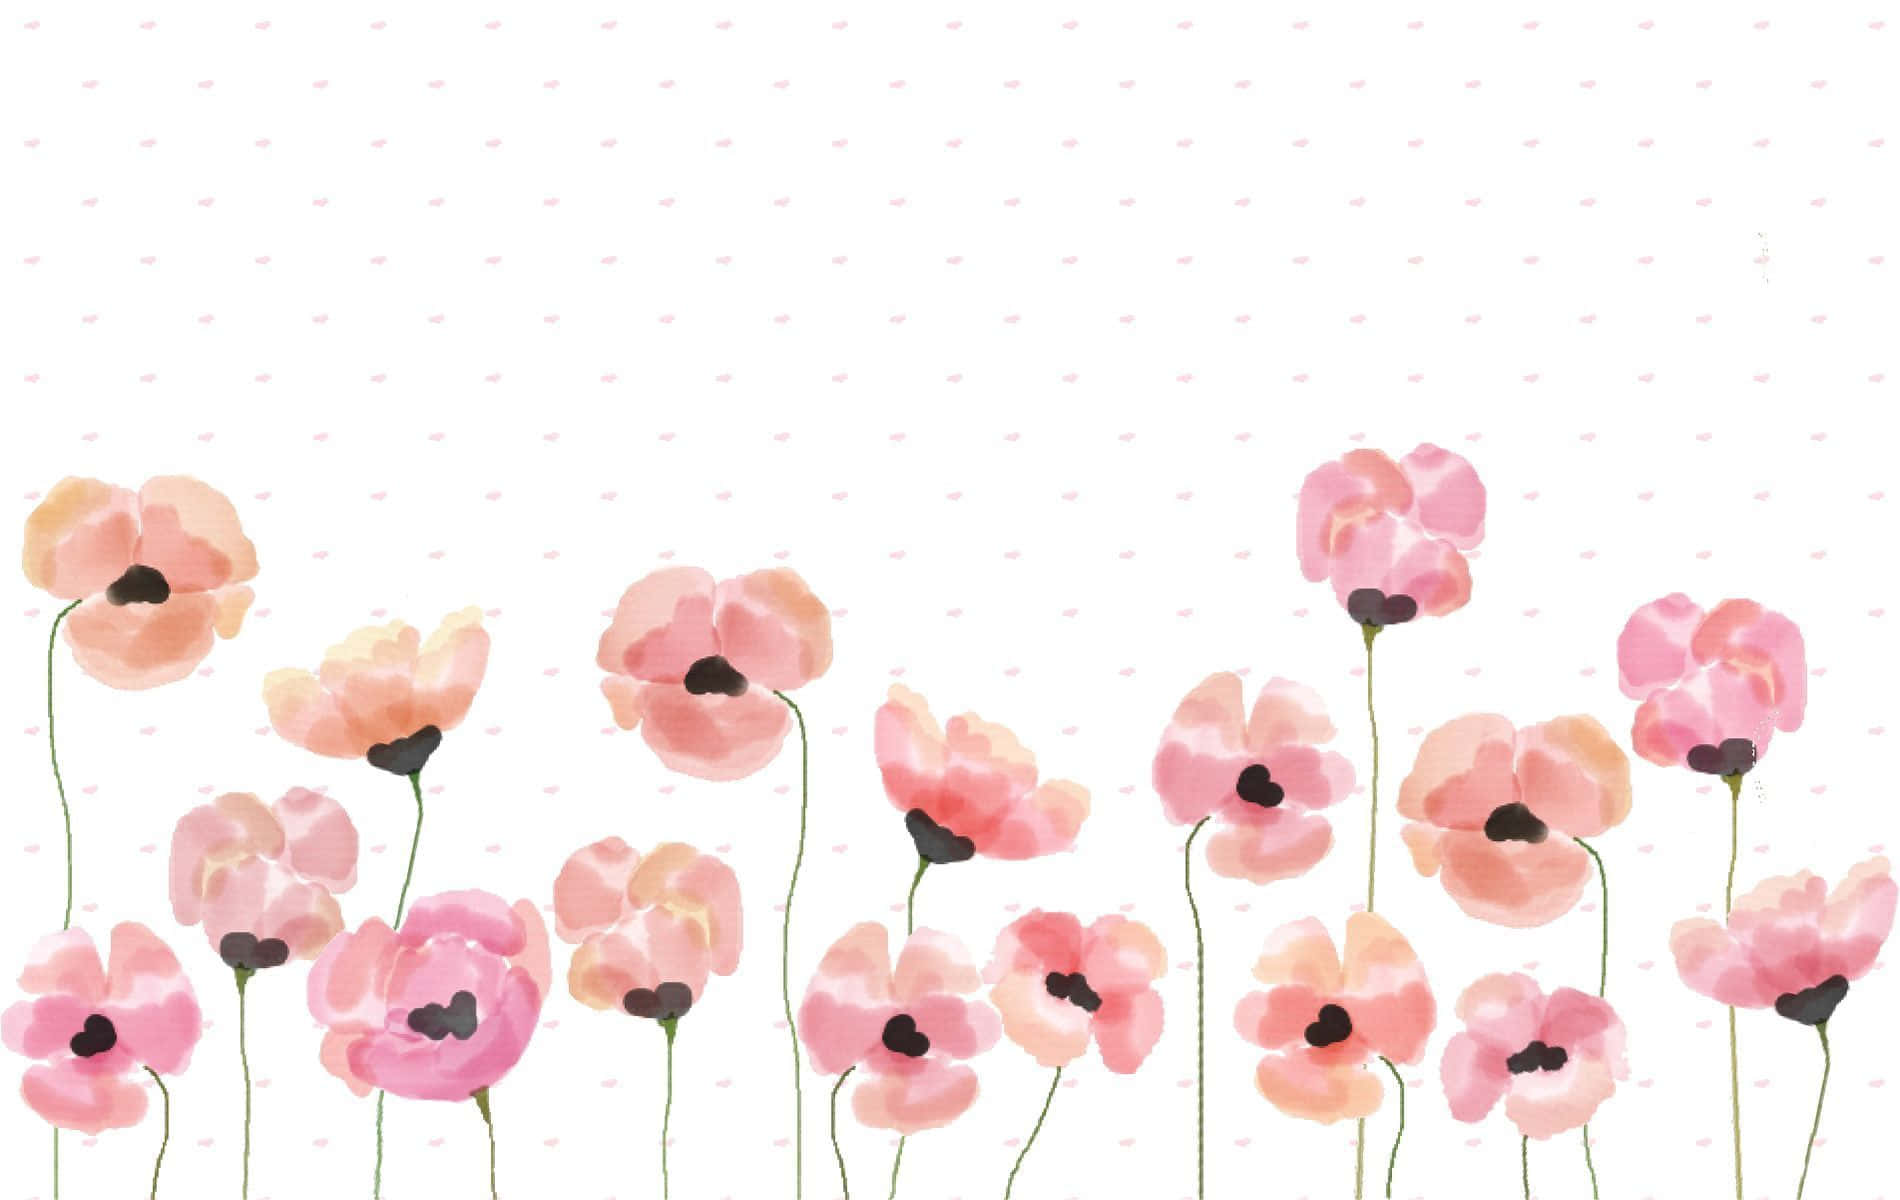 Watercolor Poppies On A Polka Dot Background